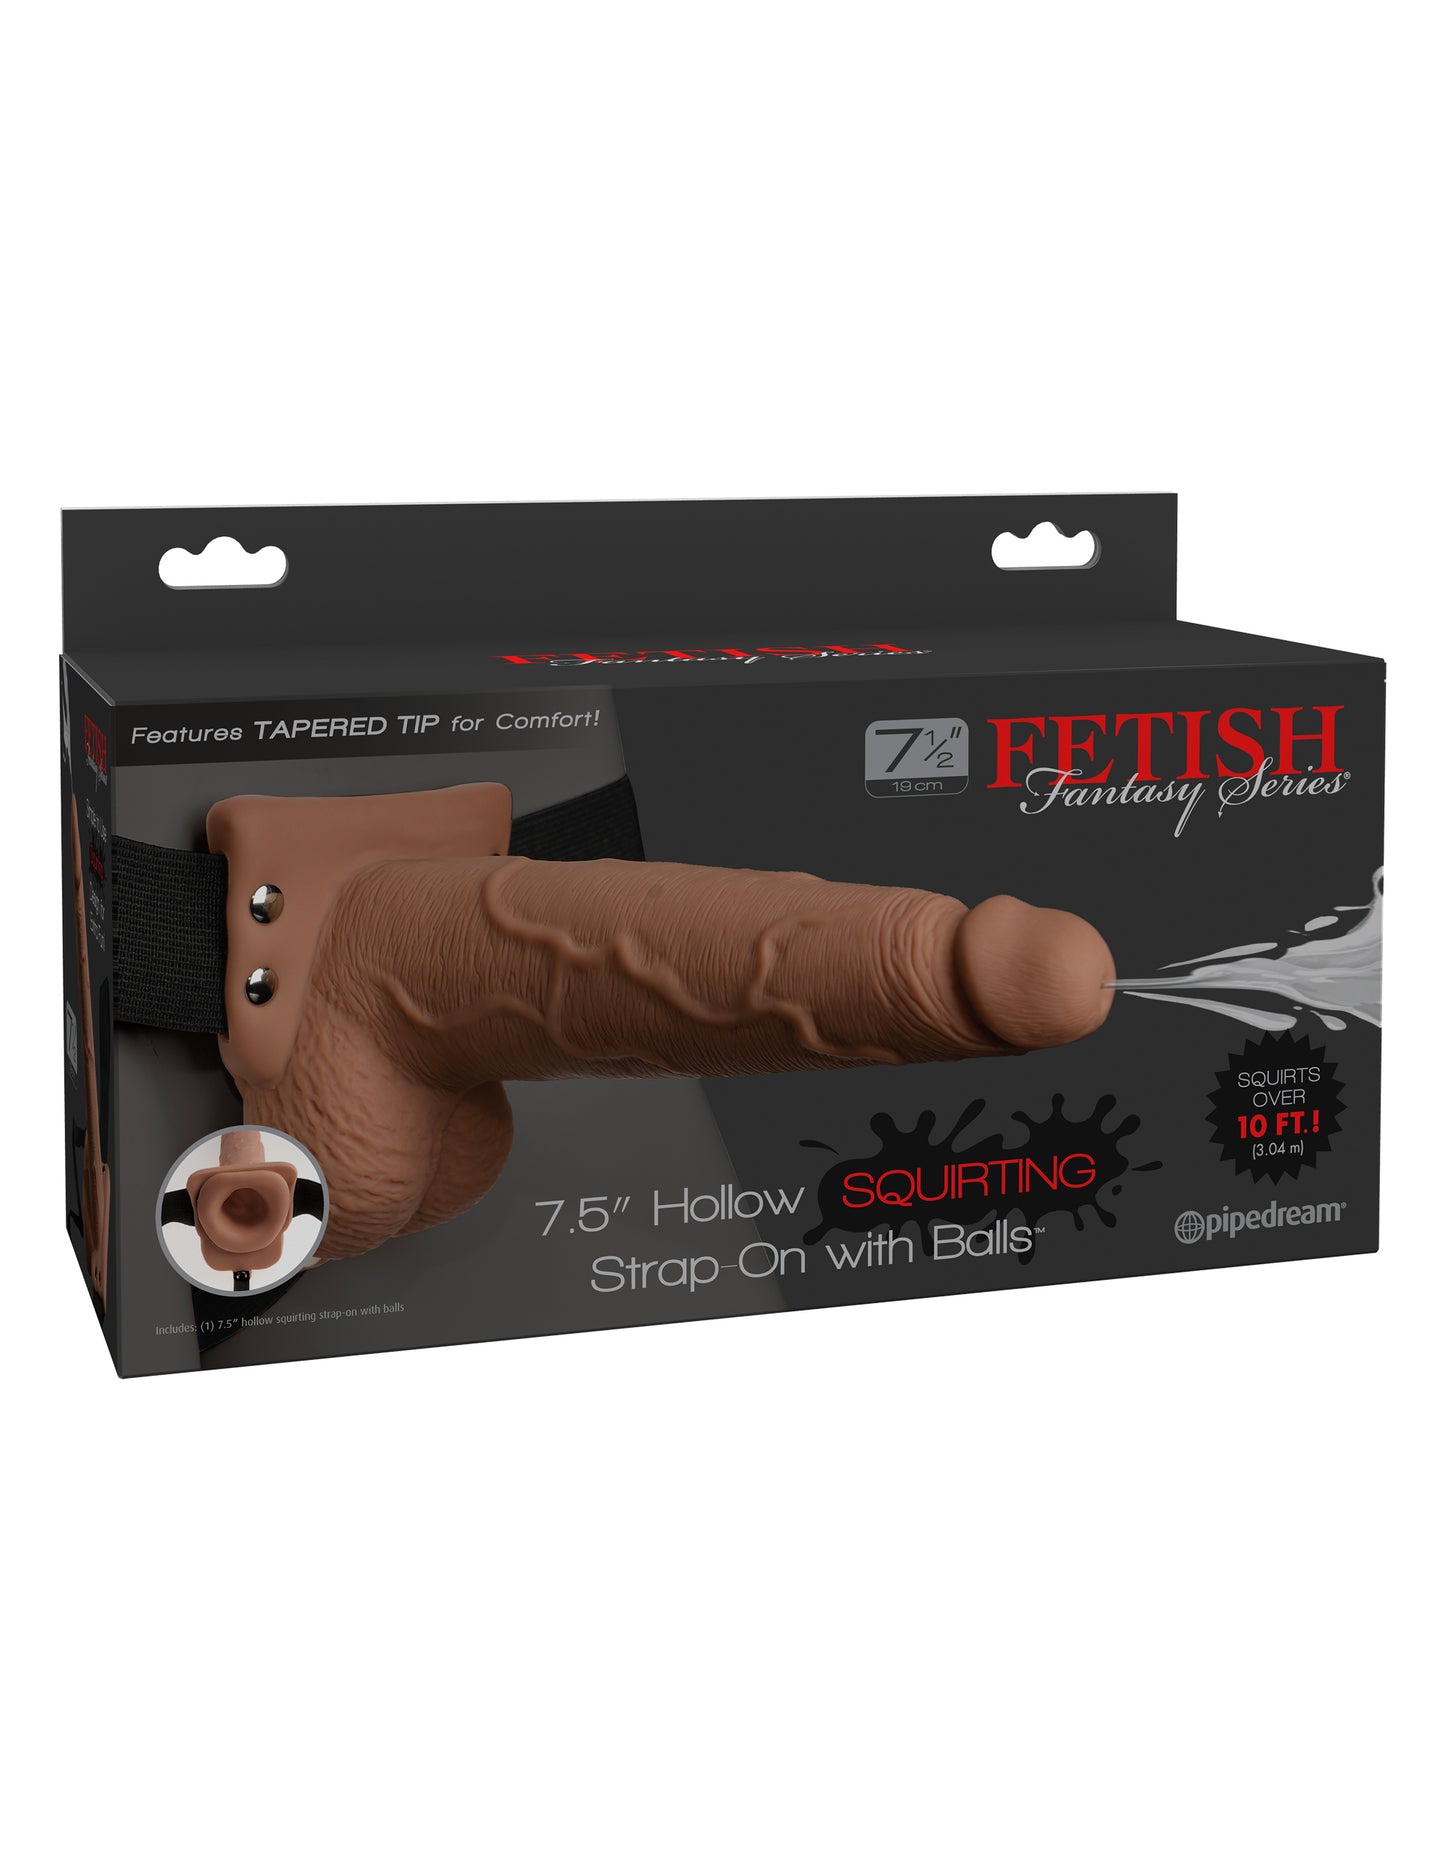 Fetish Fantasy Series 7.5" Hollow Squirting Strap-on With Balls - PD3397-22